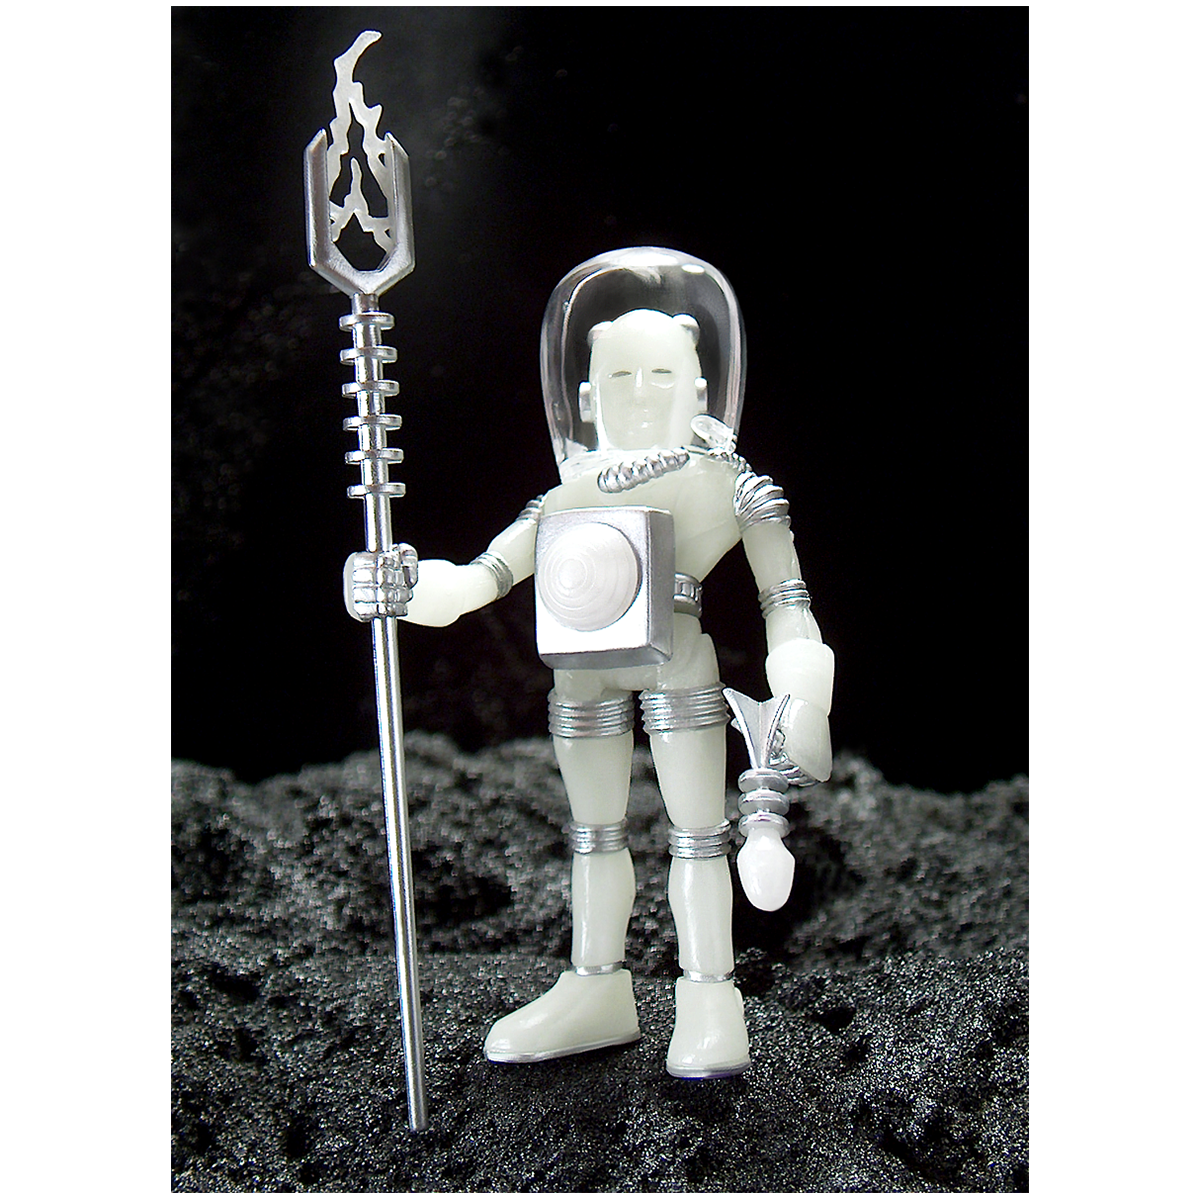 A white ELECTRON+ COSMIC RADIATION figure holding a spear on a rock.